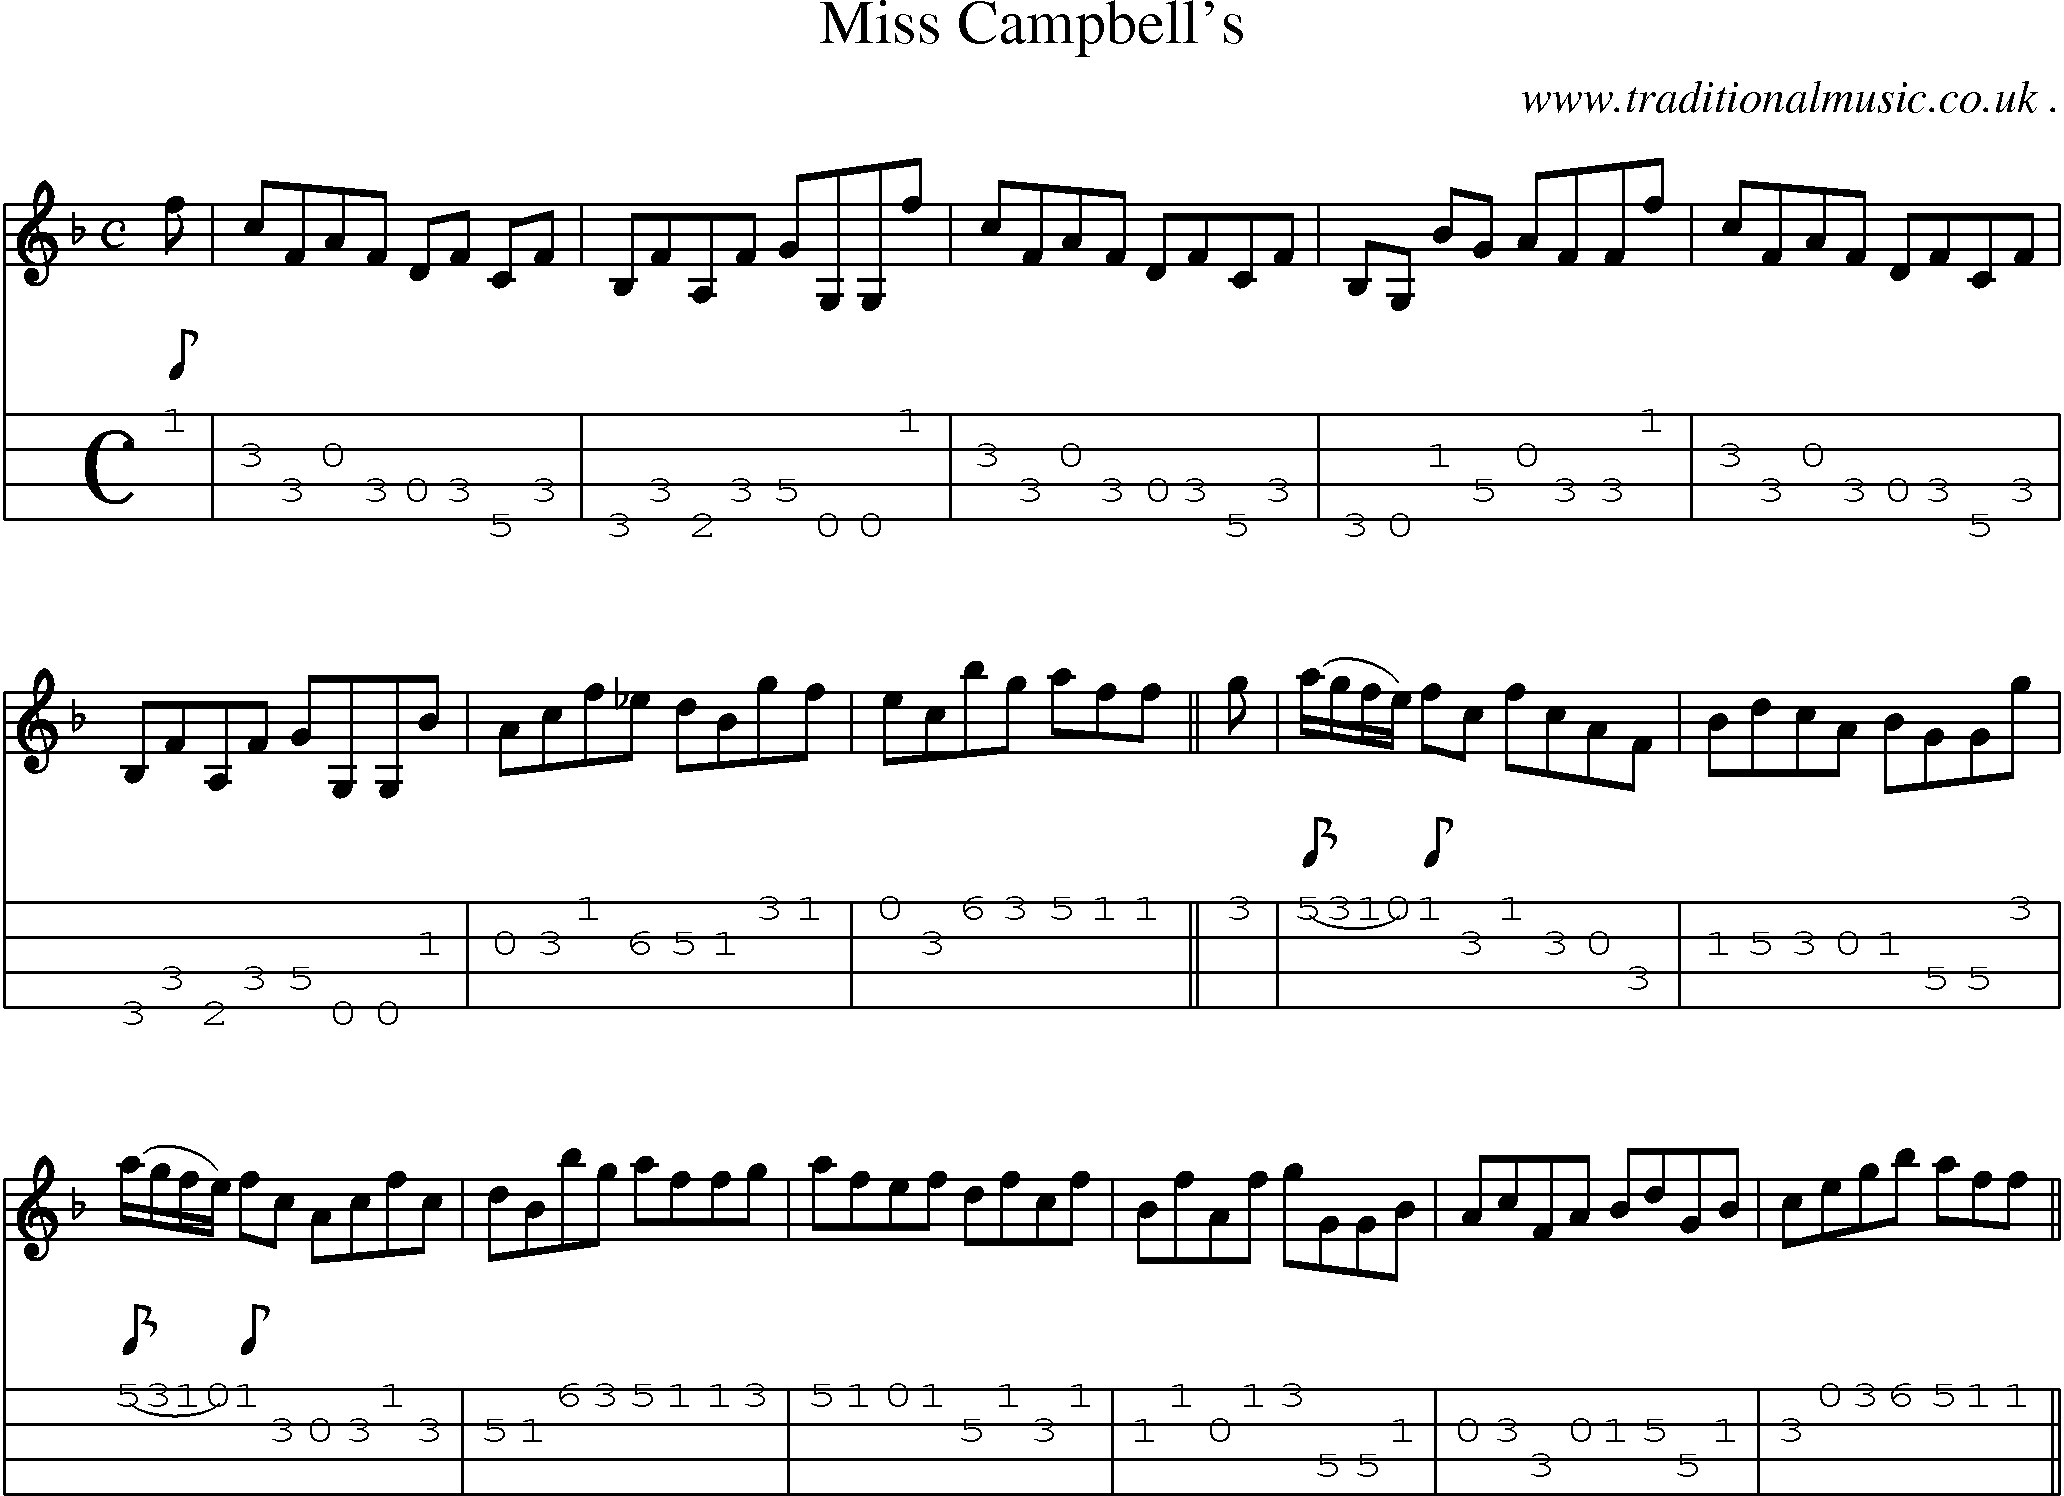 Sheet-music  score, Chords and Mandolin Tabs for Miss Campbells